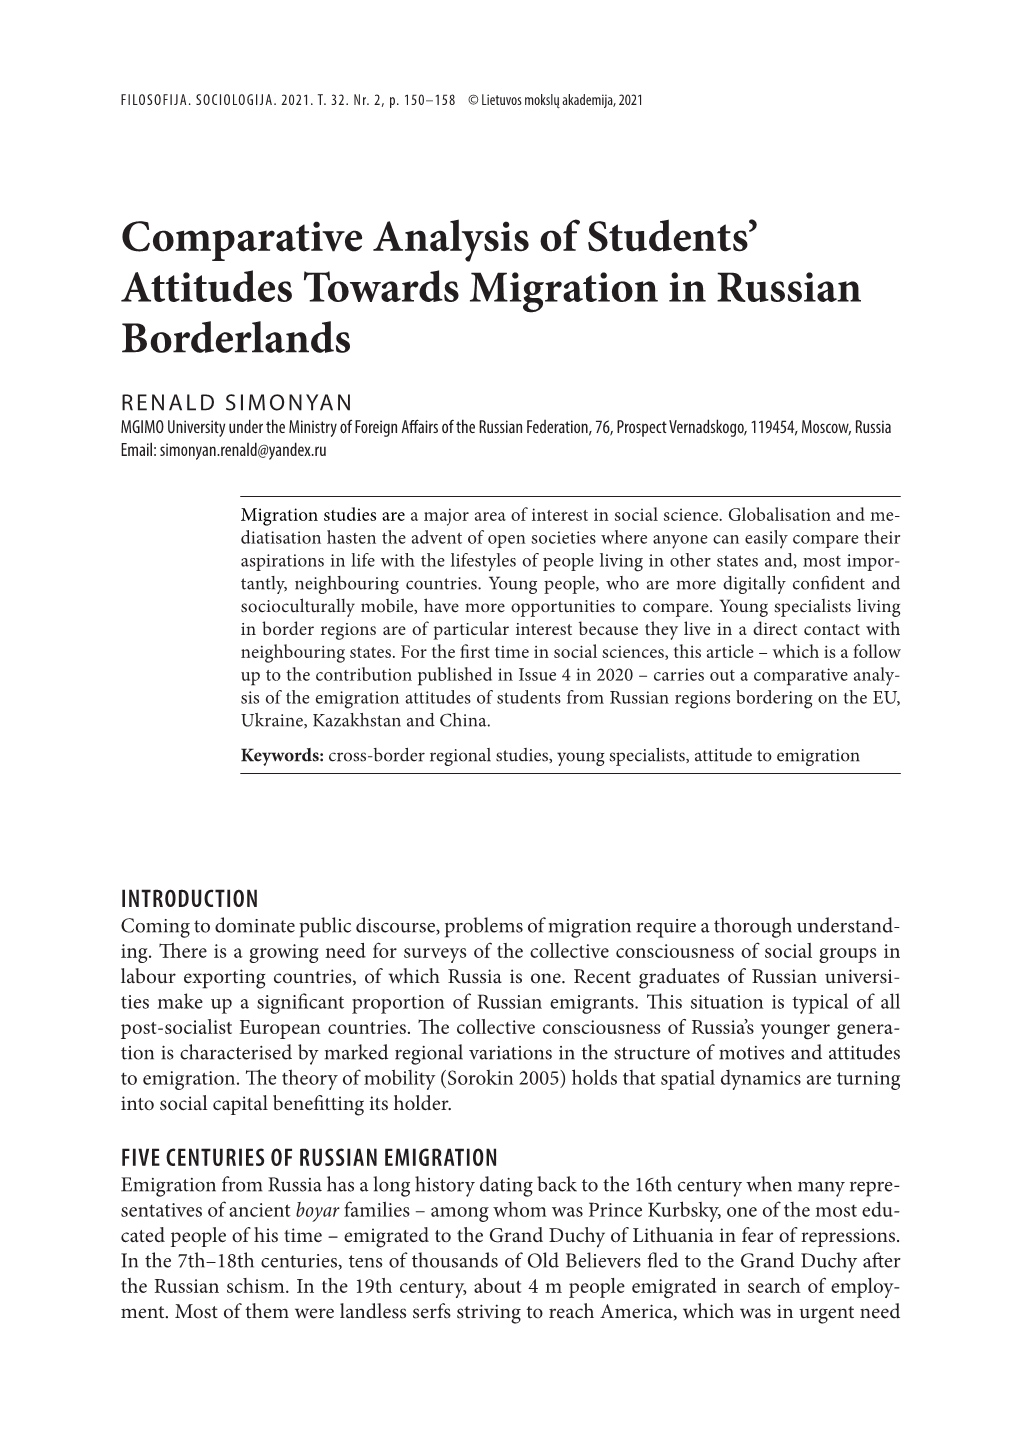 Comparative Analysis of Students' Attitudes Towards Migration In